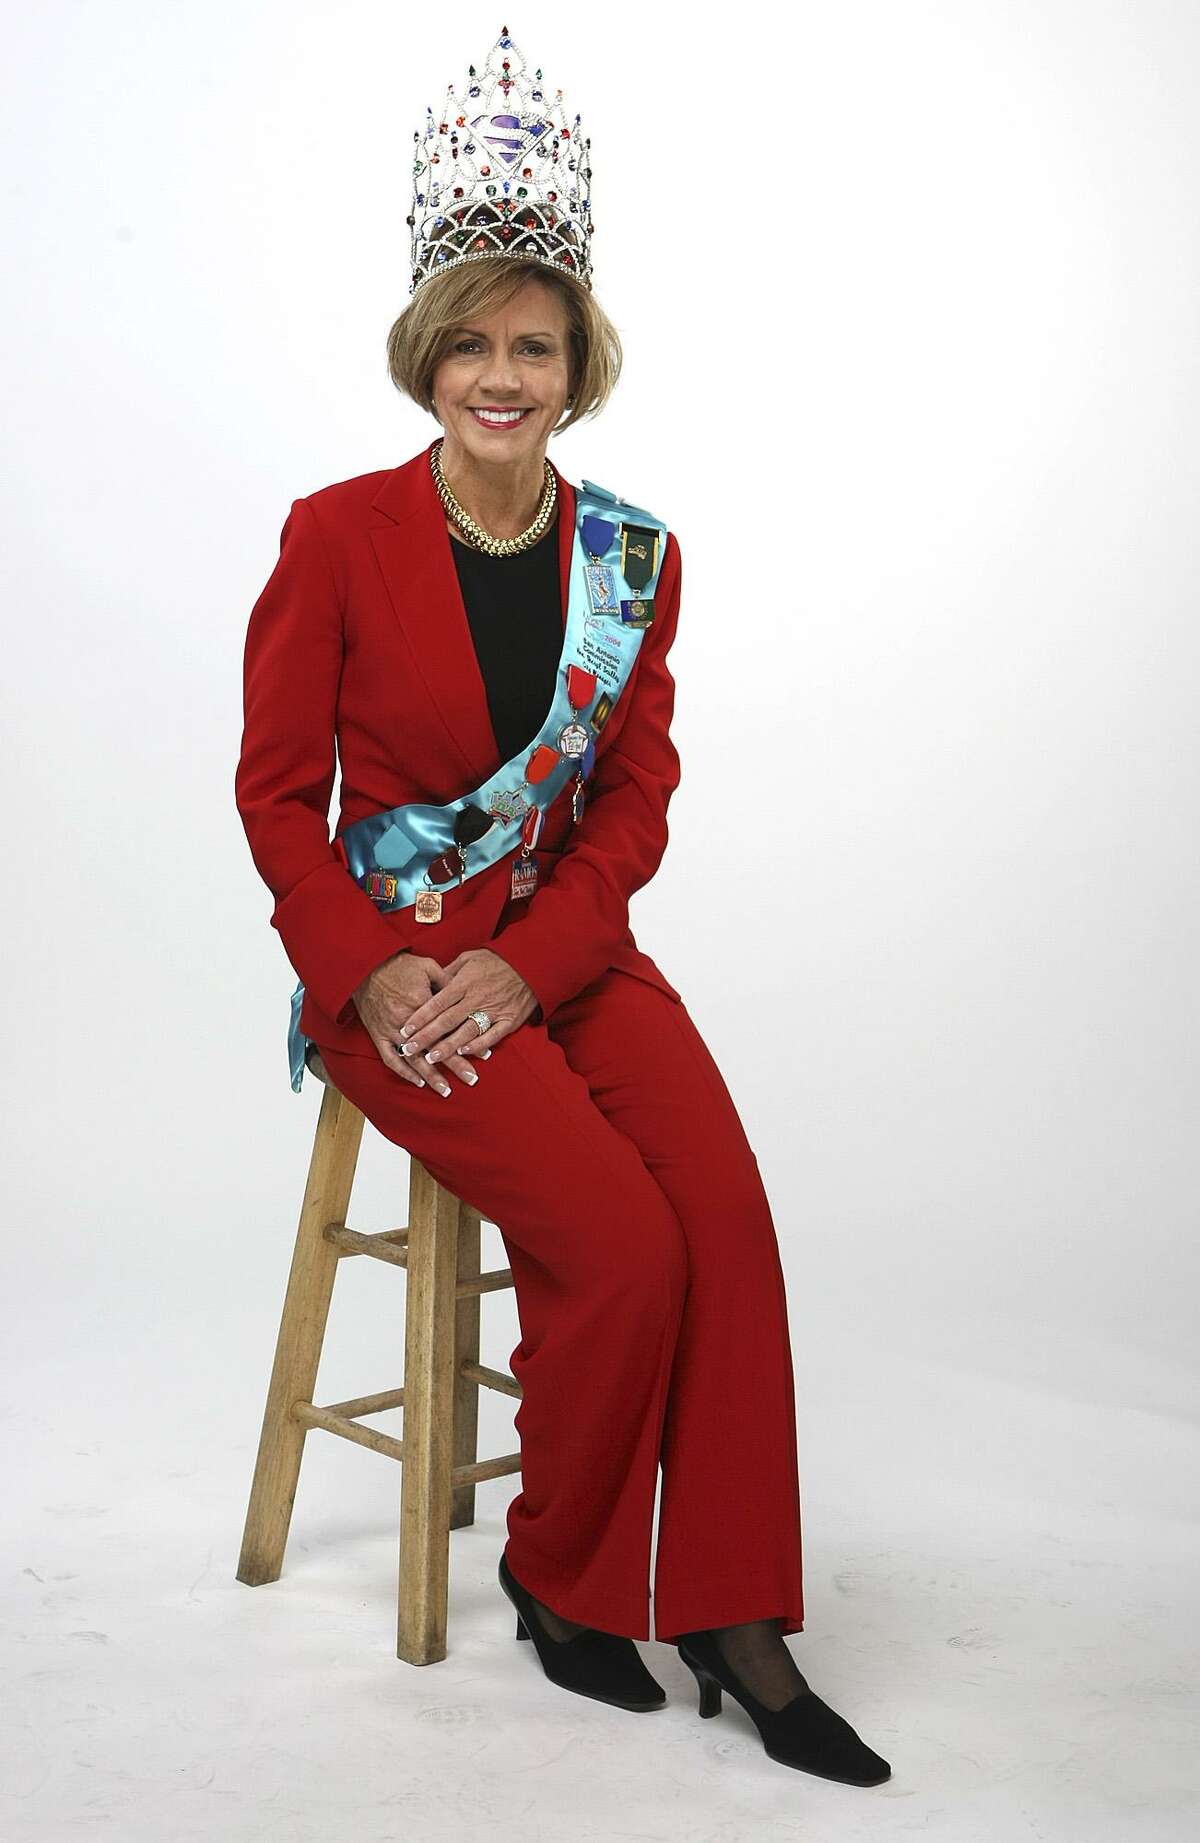 In 2009 for Cornyation, City Manager Sheryl Sculley was King Anchovy of the Court of the Fancy Flying Footwear. She is keeping her King Anchovy medals but is offering at auction 13 years’ worth of other Fiesta medals and other memorabilia.